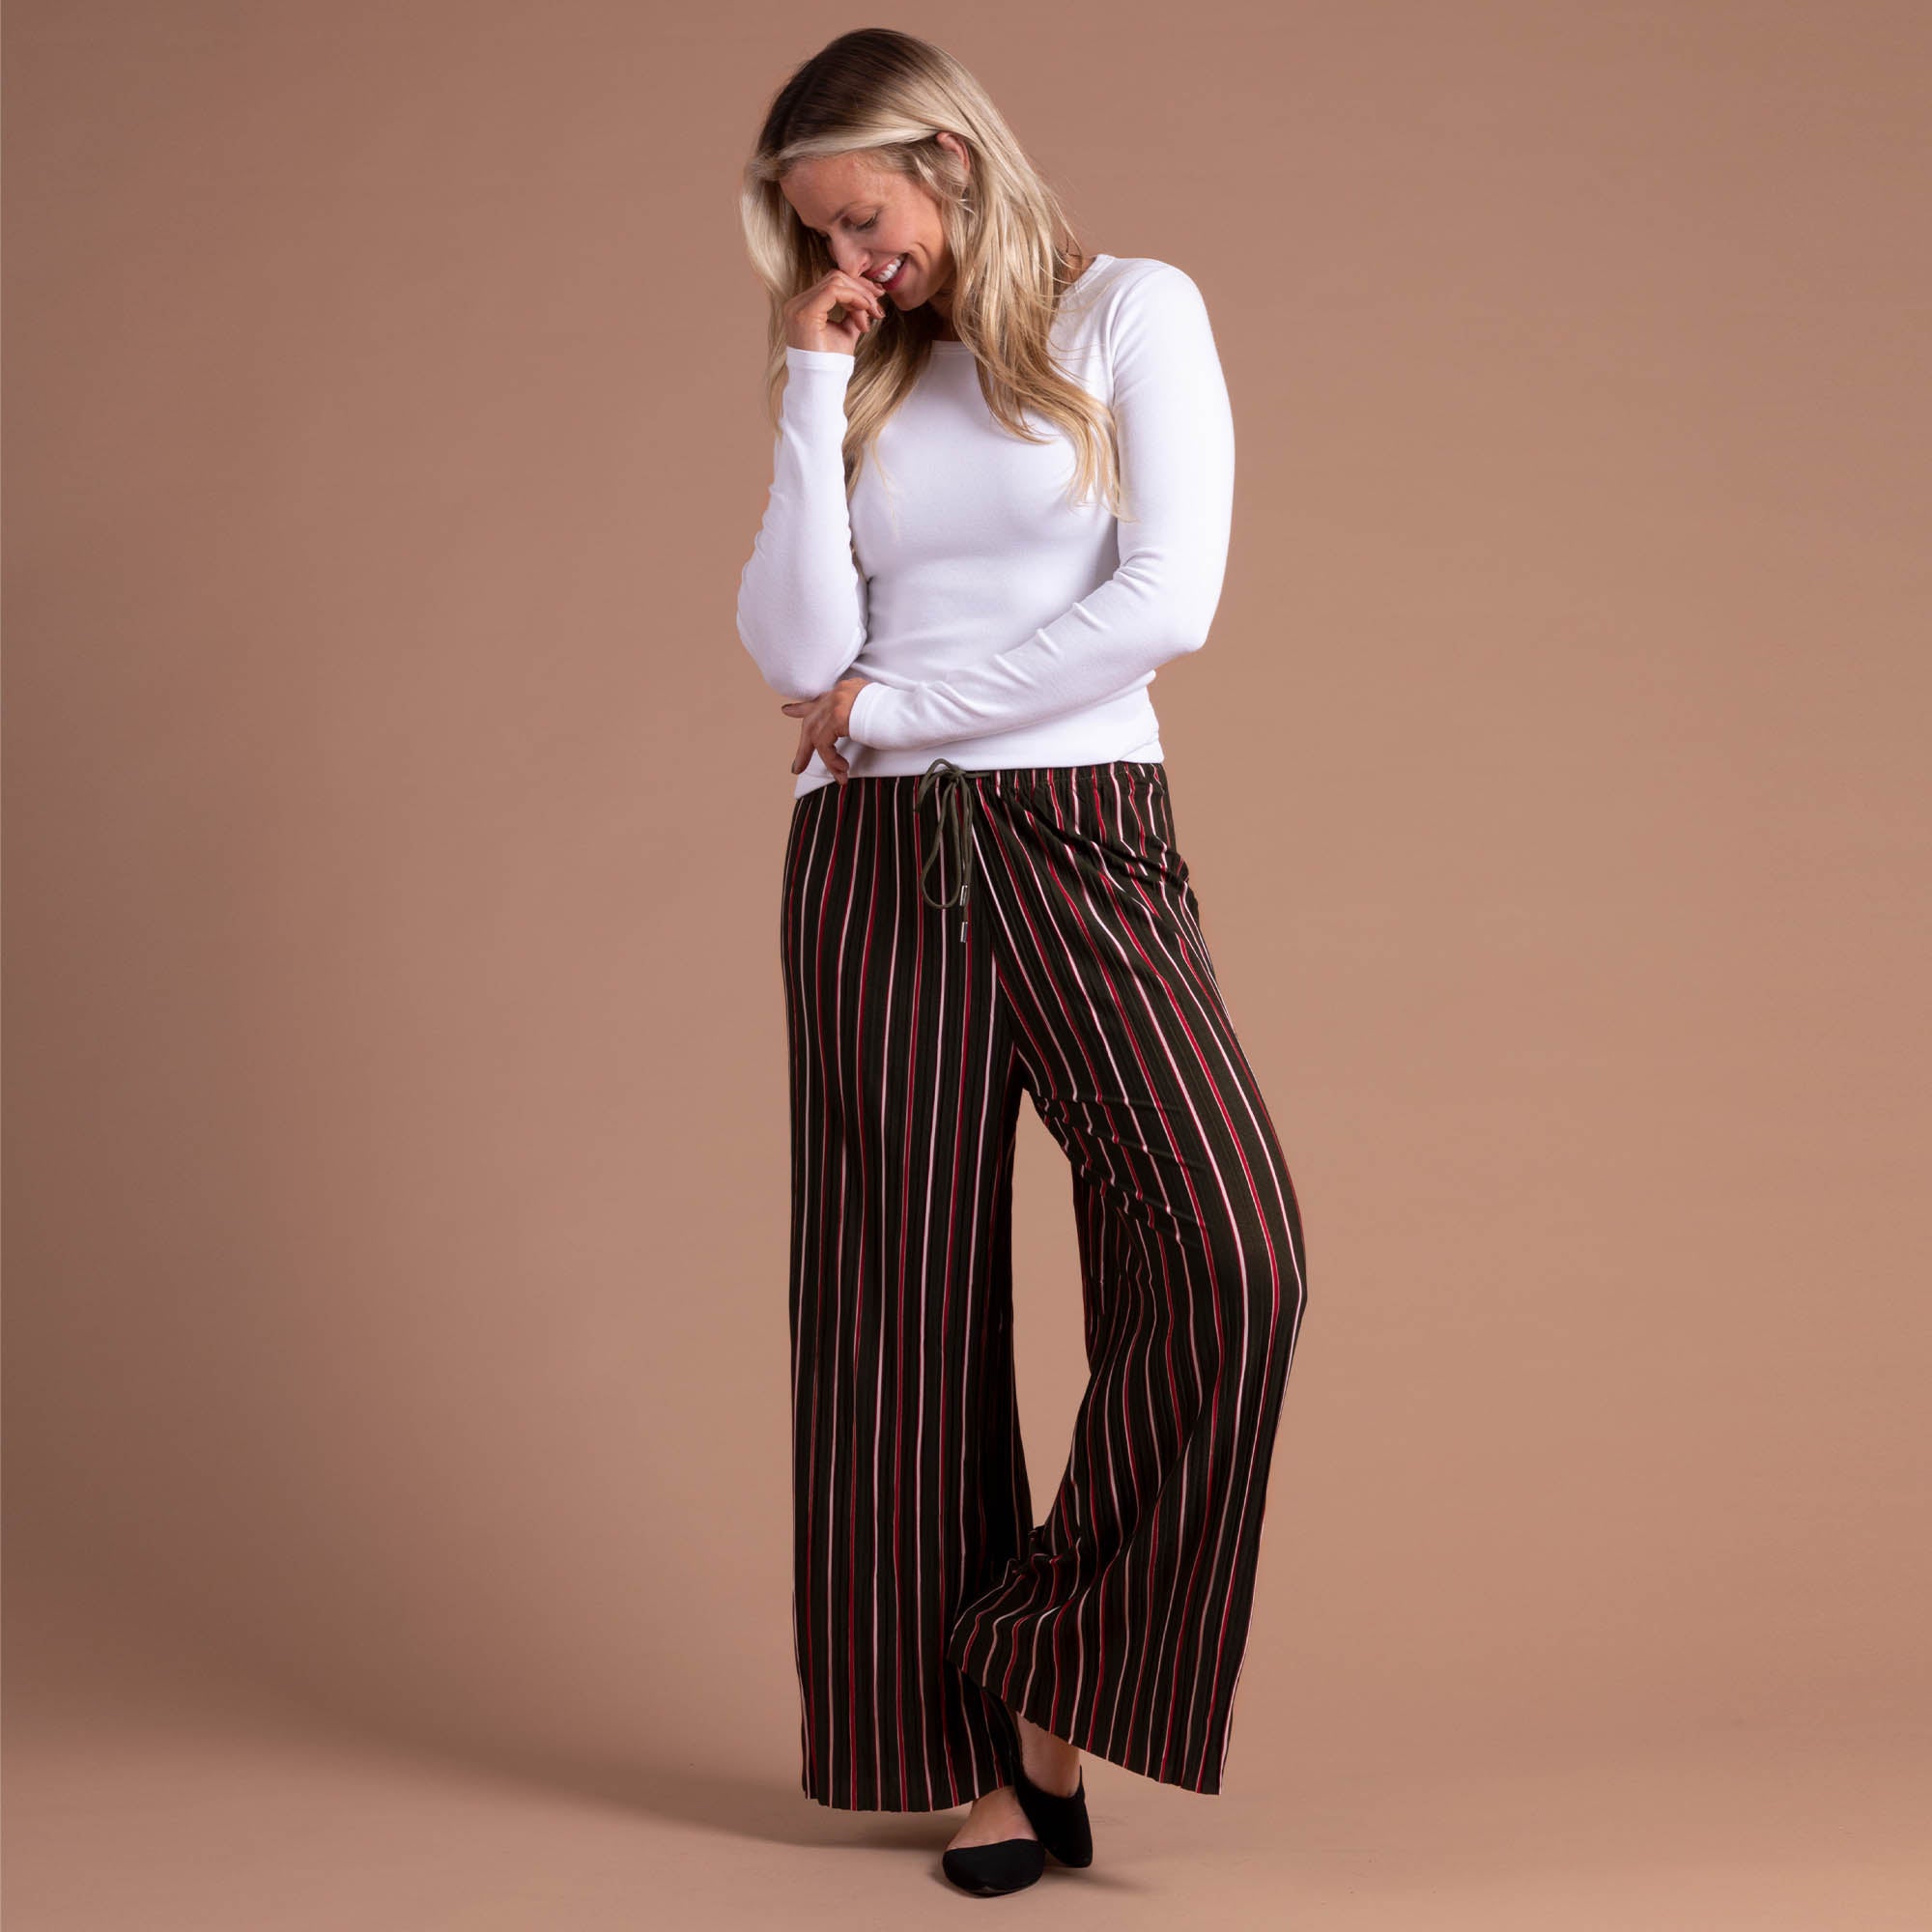 Striped Pleated Palazzo Wide Leg Pants - Black & White - One Size Fits Most Plus